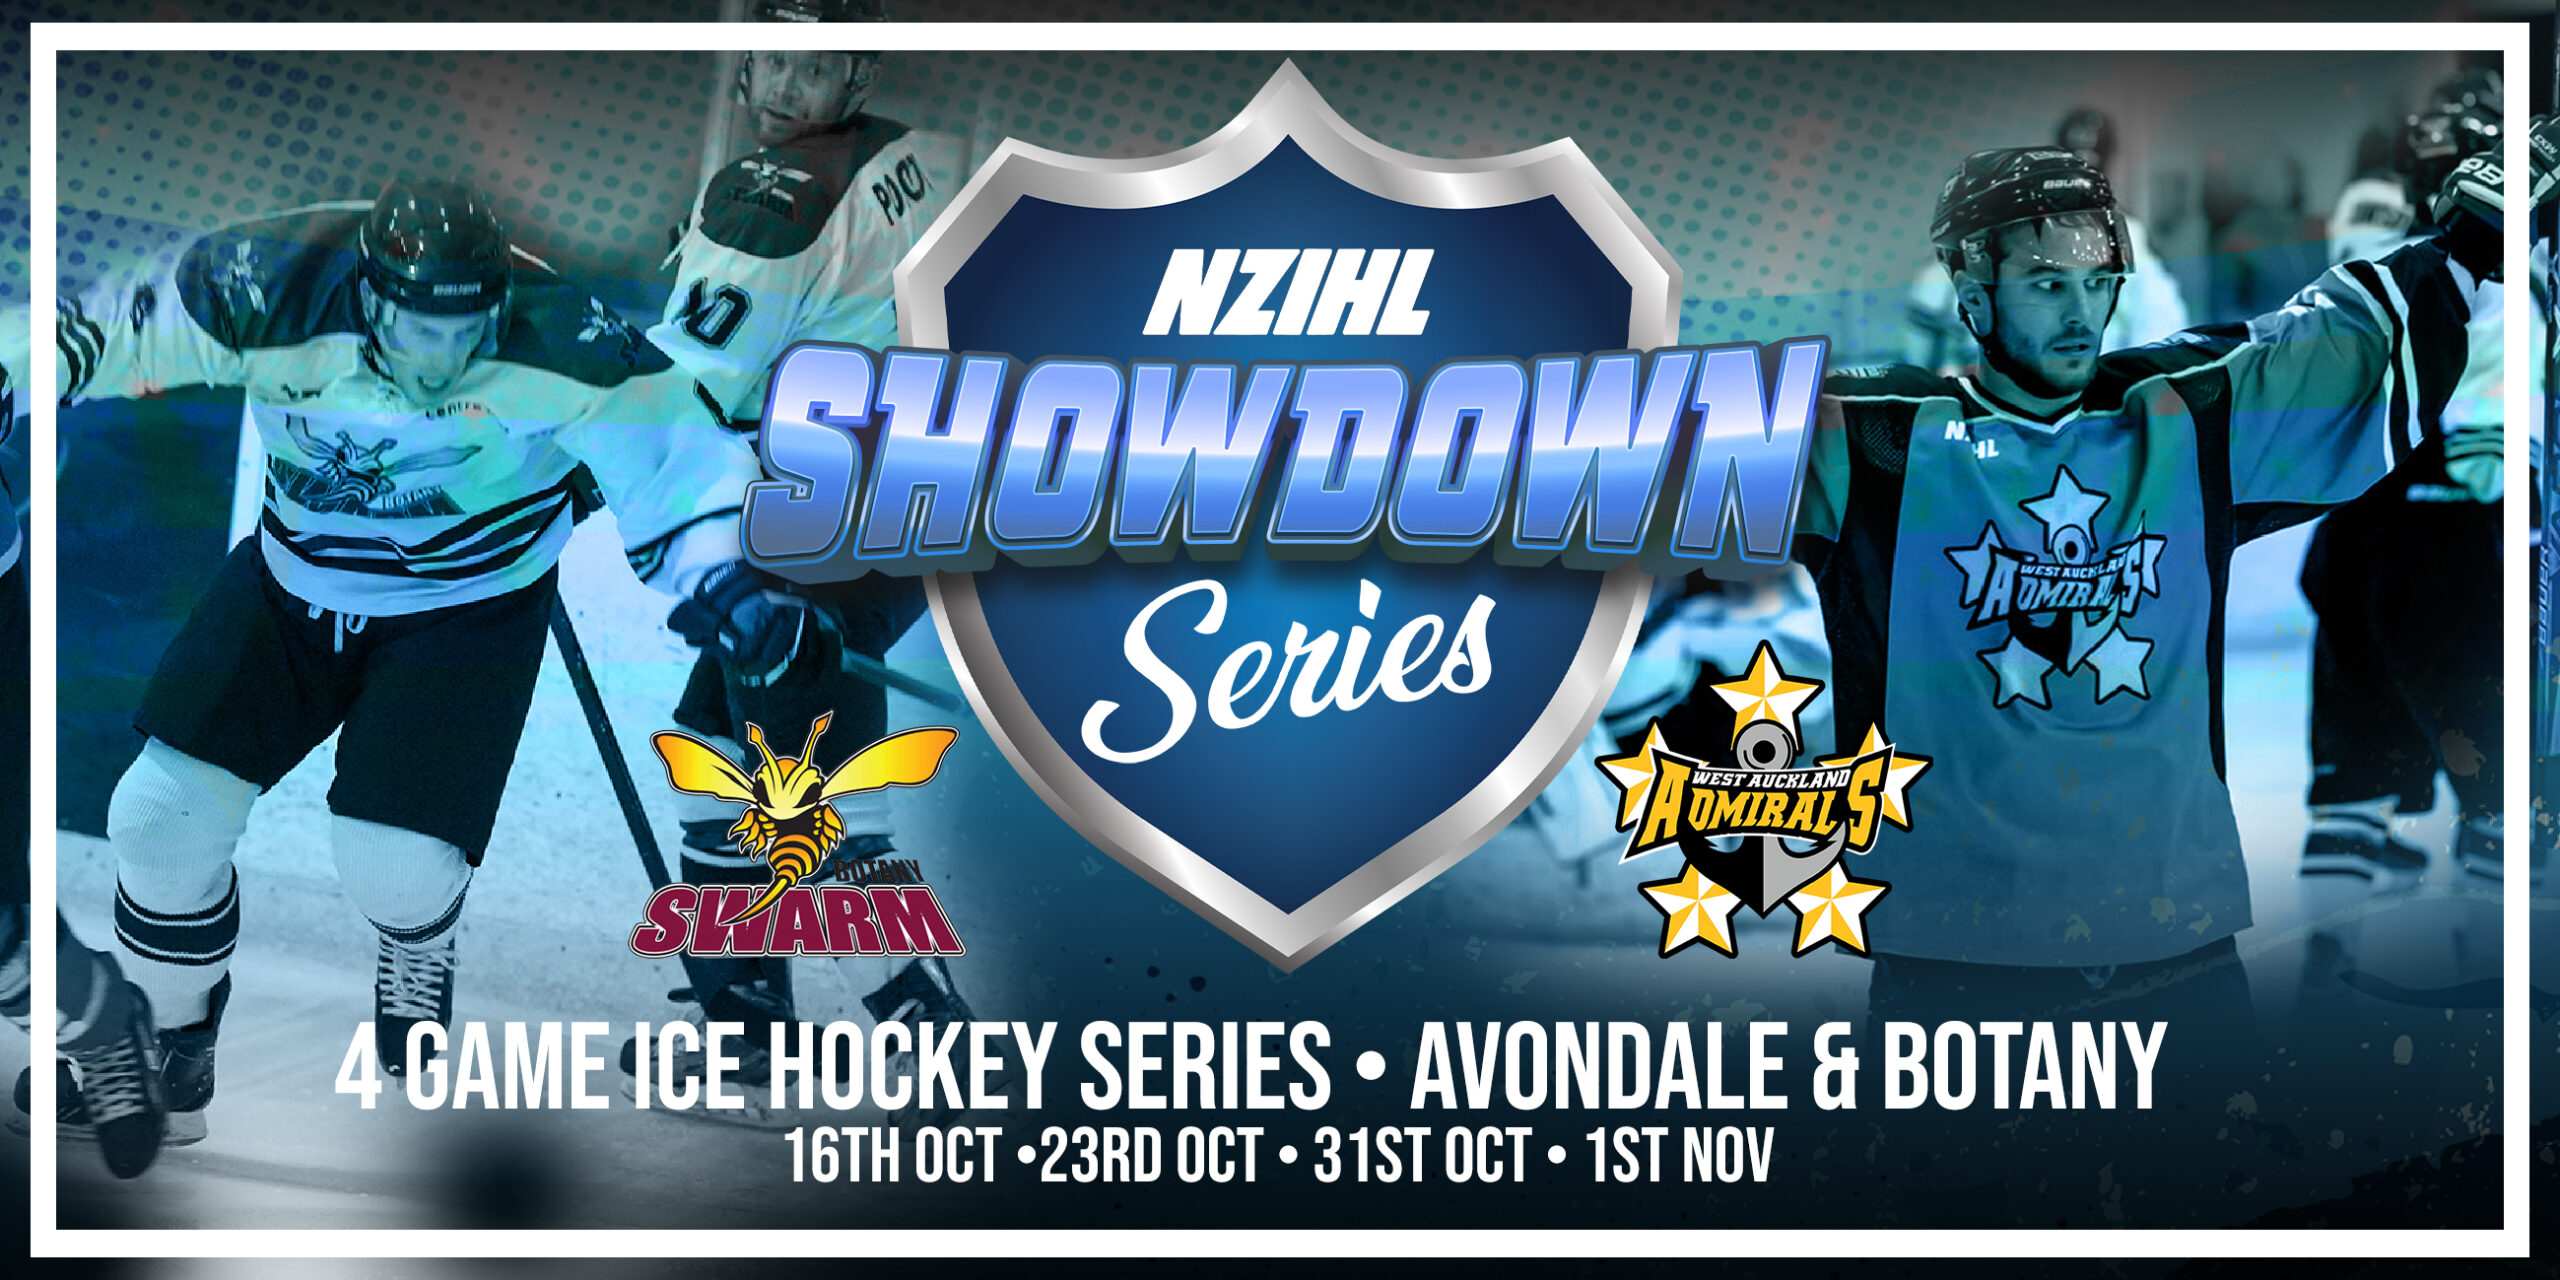 Home West Auckland Admirals New Zealand Ice Hockey League